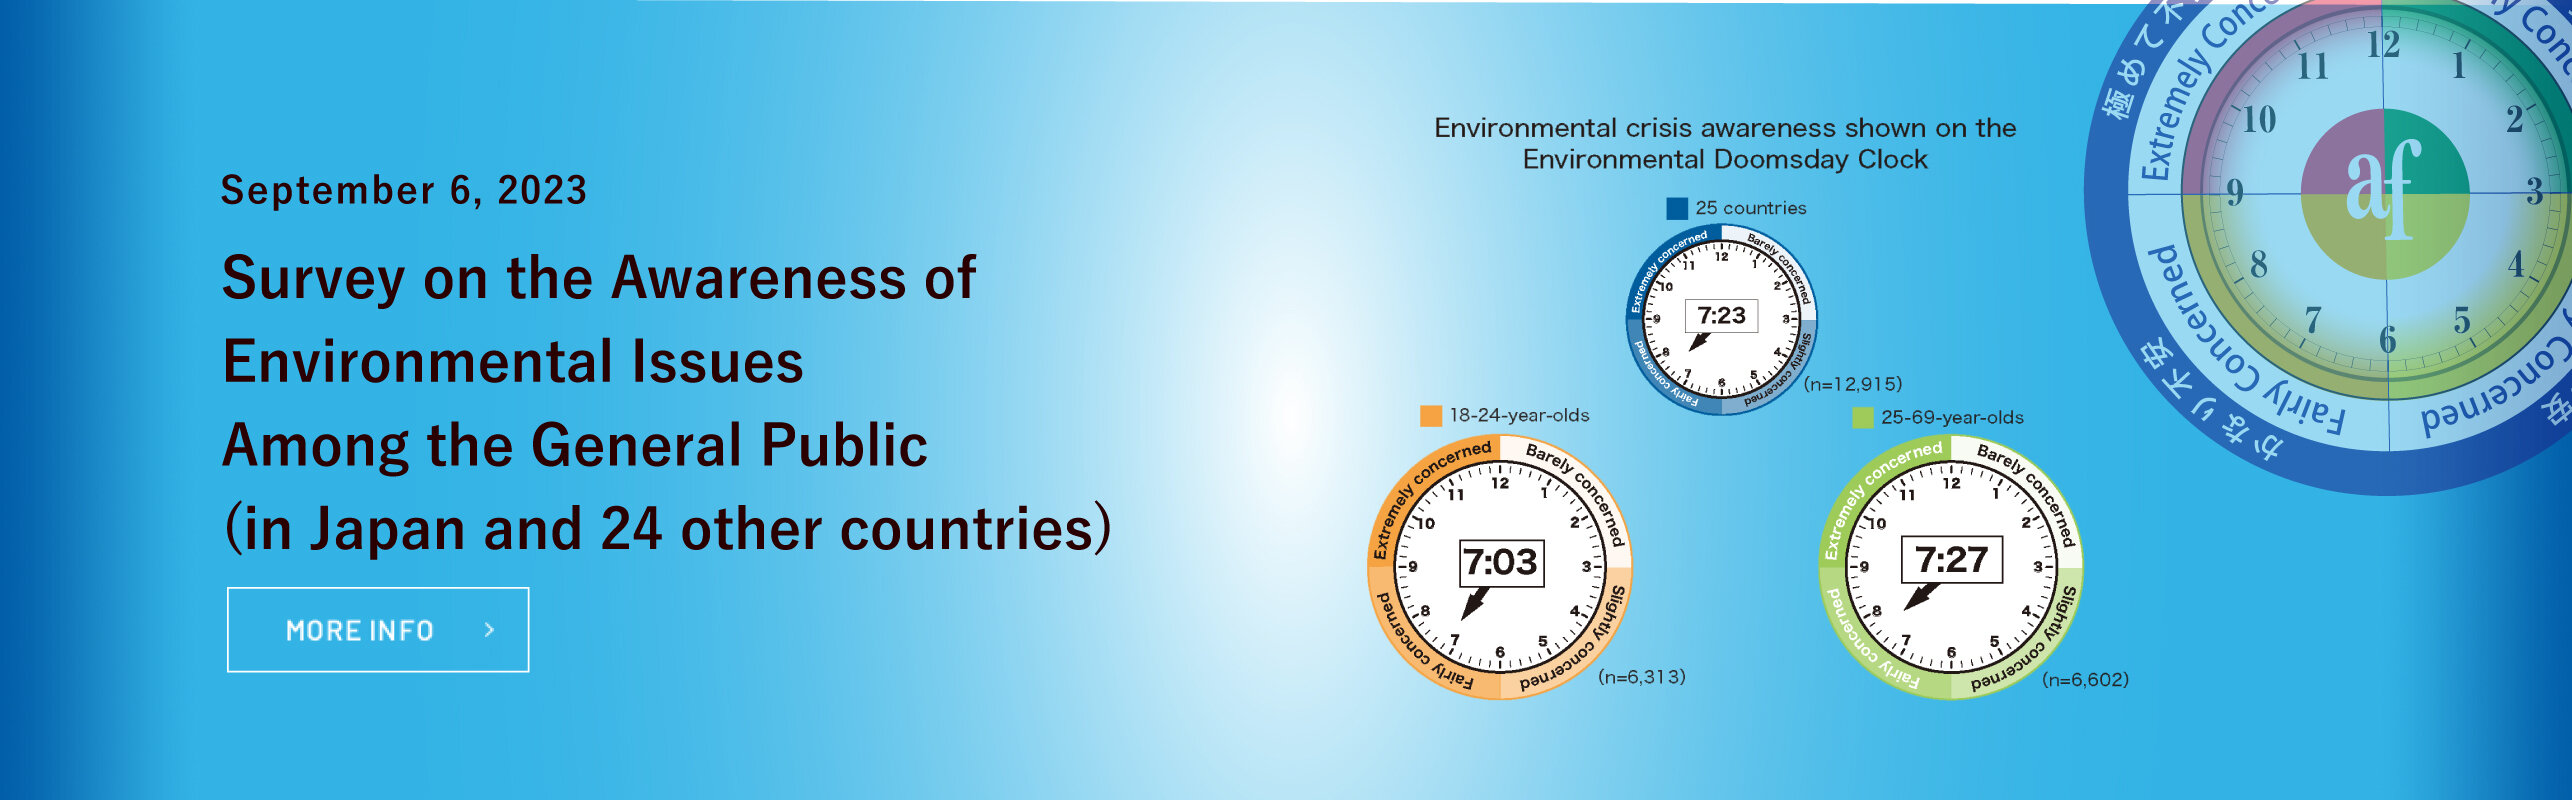 Results of the 2023 Survey on the Awareness of Environmental Issues Among the General Public (in Japan and 24 other countries)